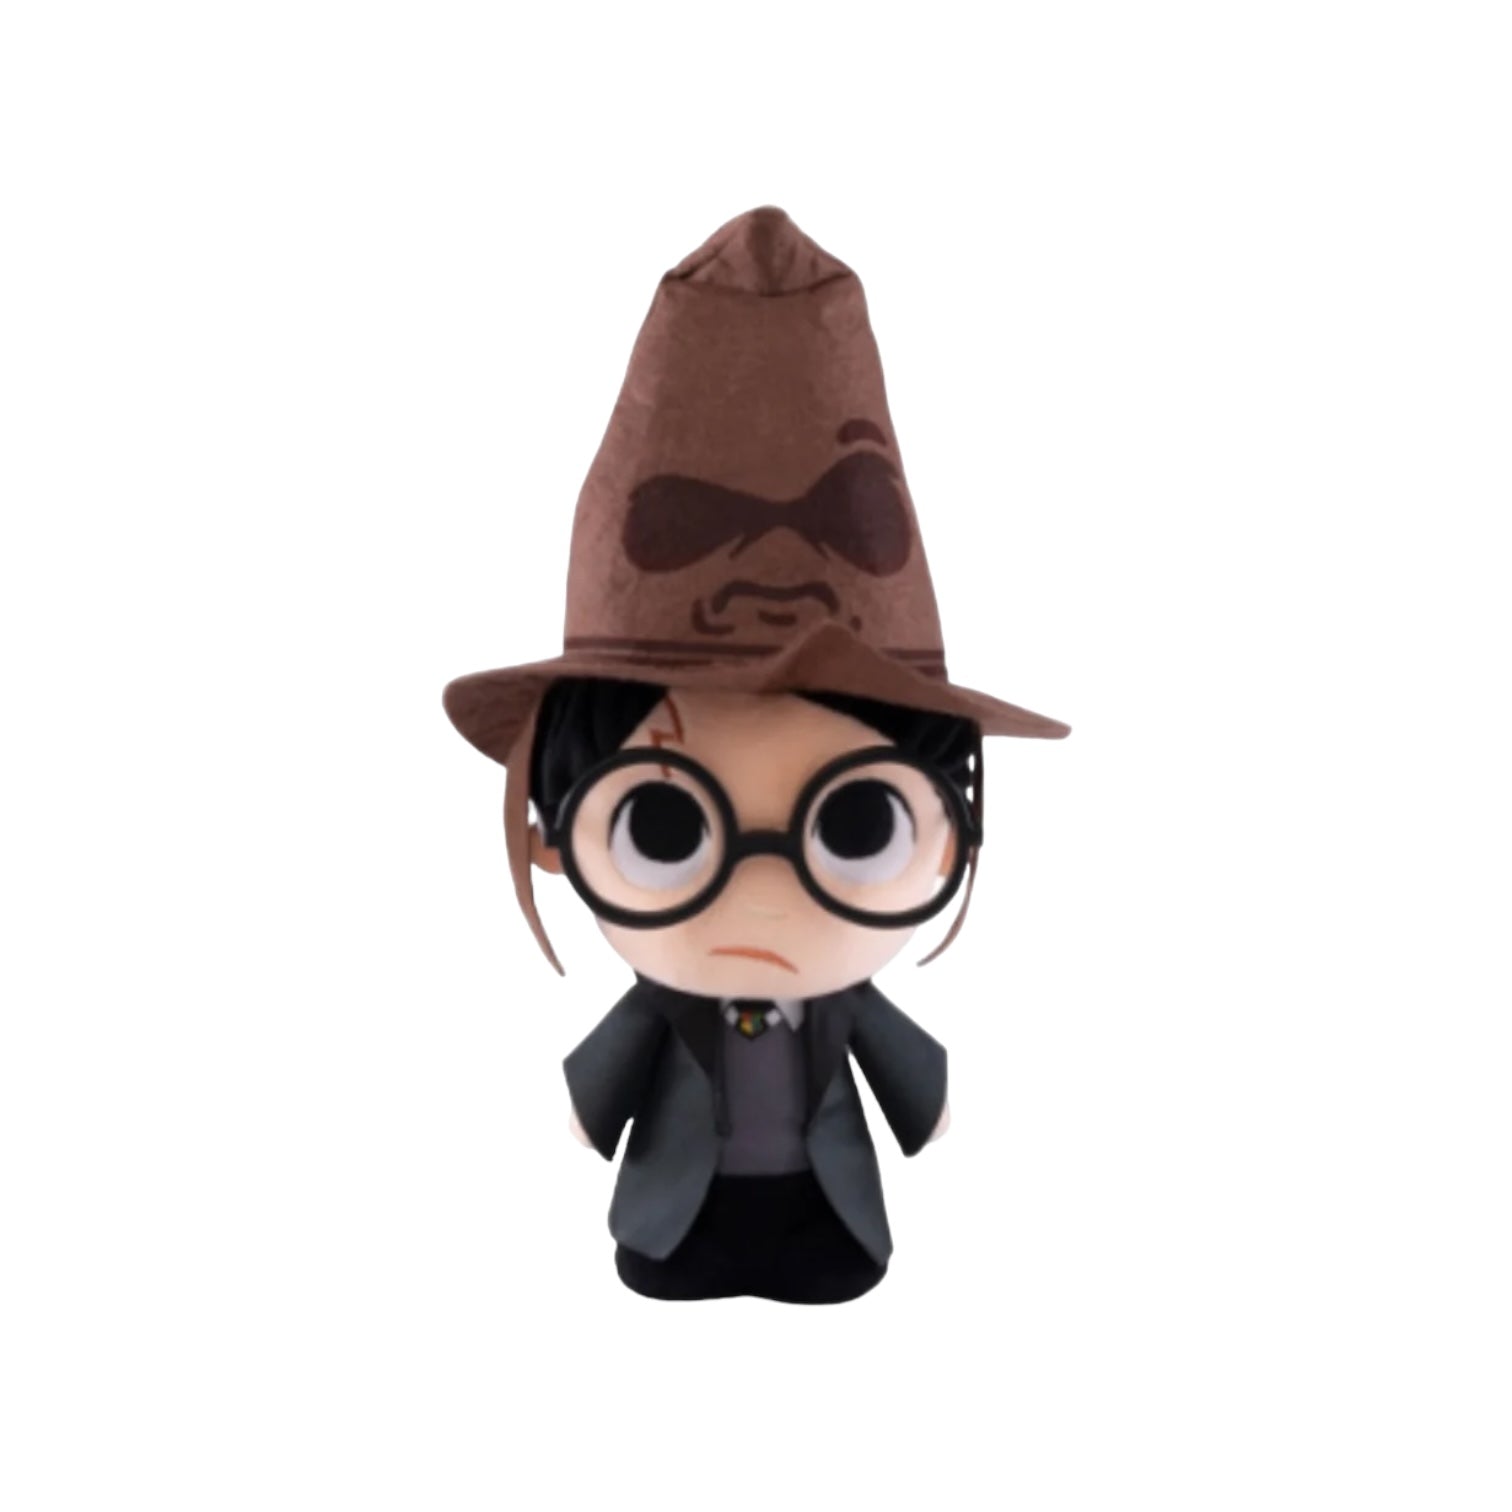 Harry Potter with Sorting Hat Funko Plush - Harry Potter